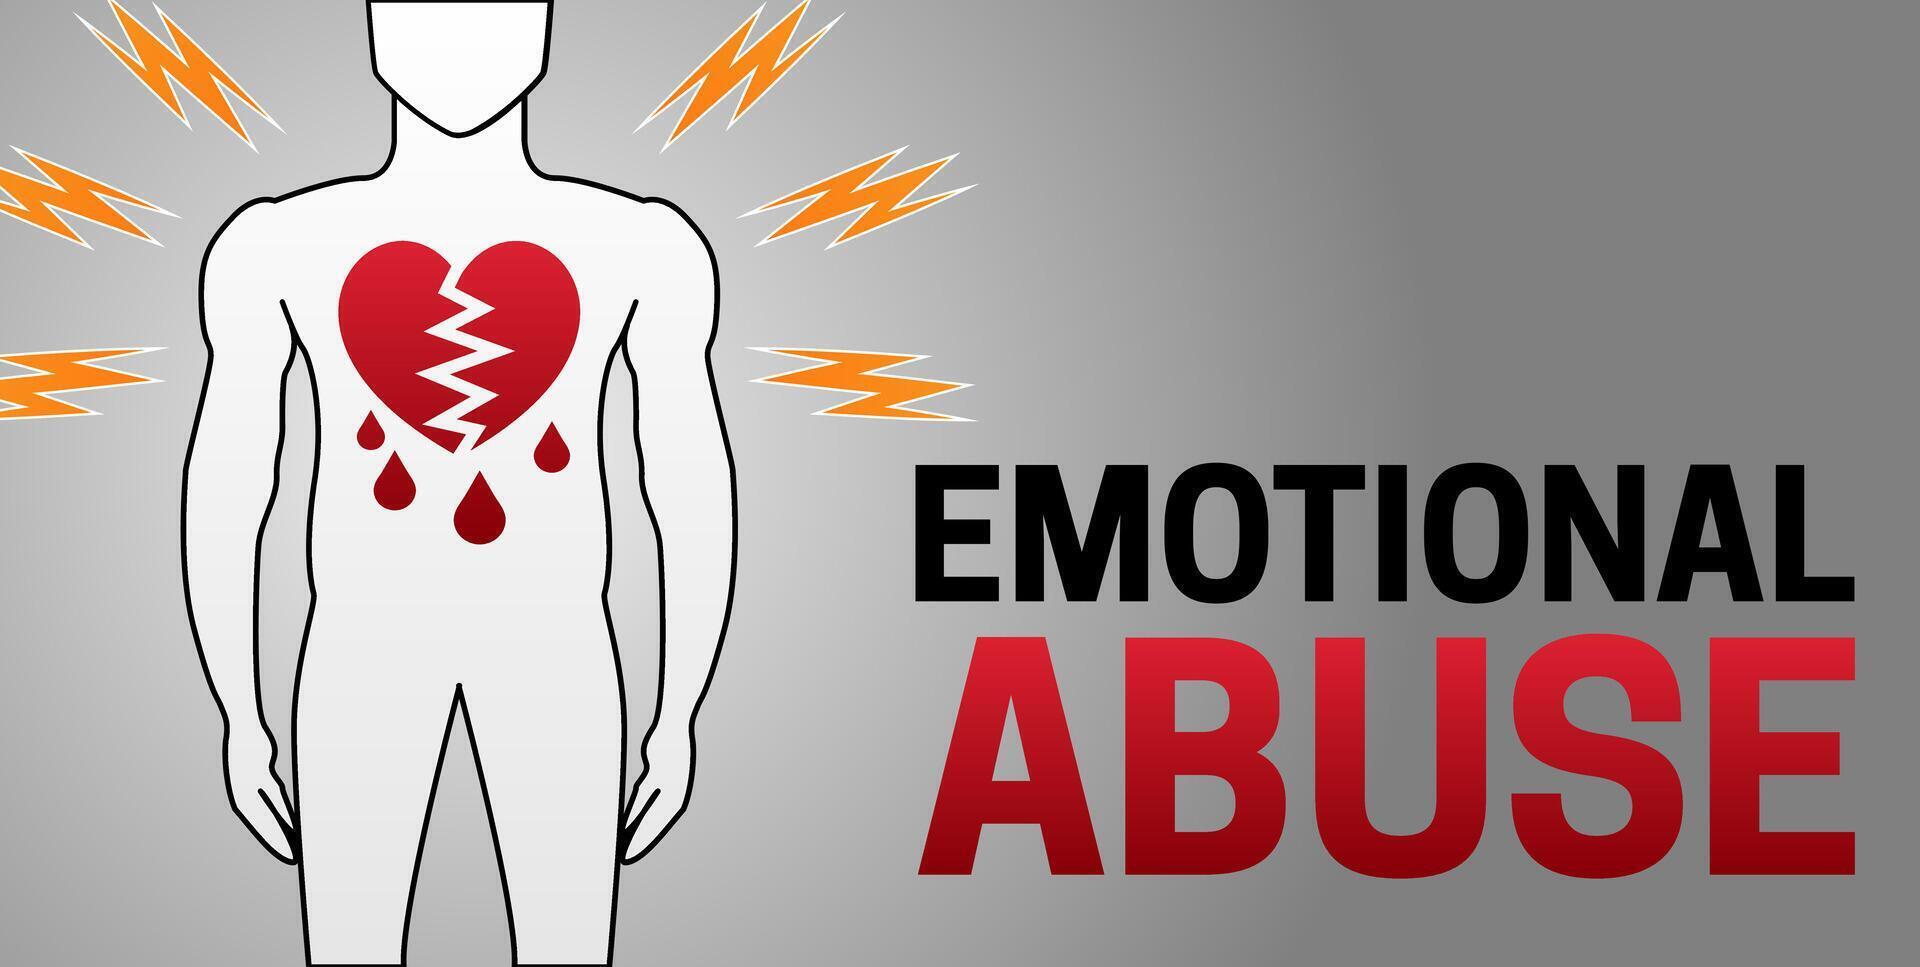 Emotional Abuse Background Illustration with Man vector